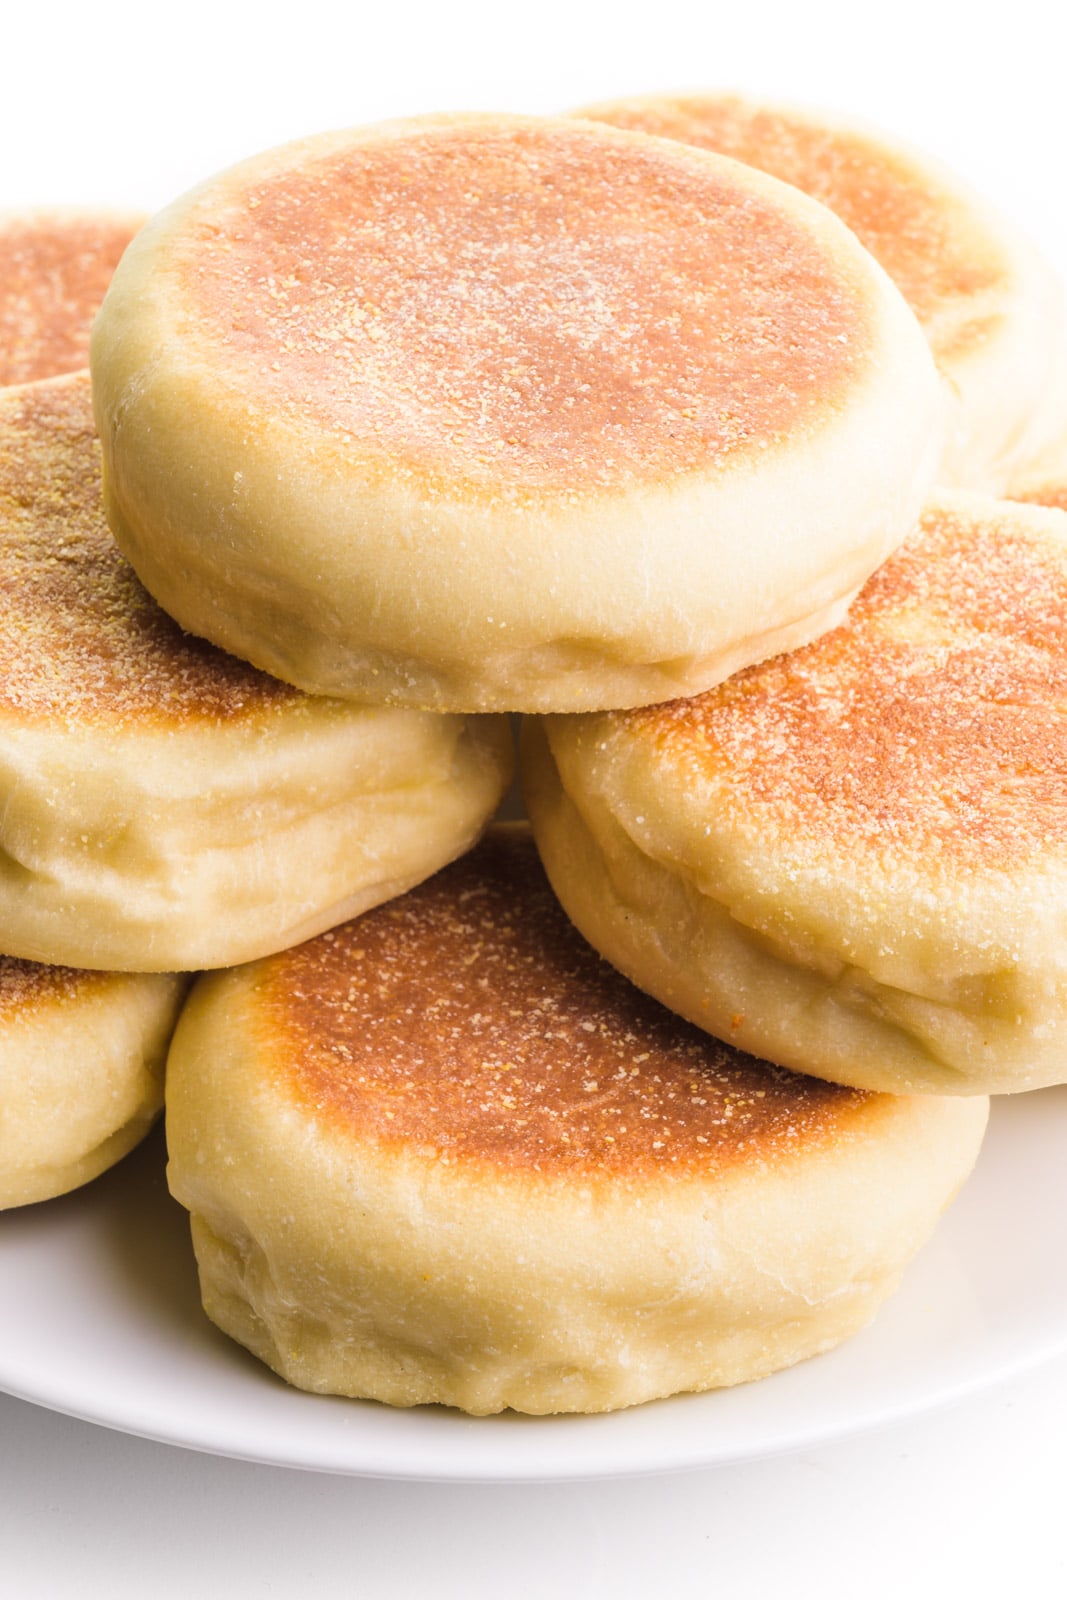 Several English muffins sit on a plate, showing golden-brown crusts on top.